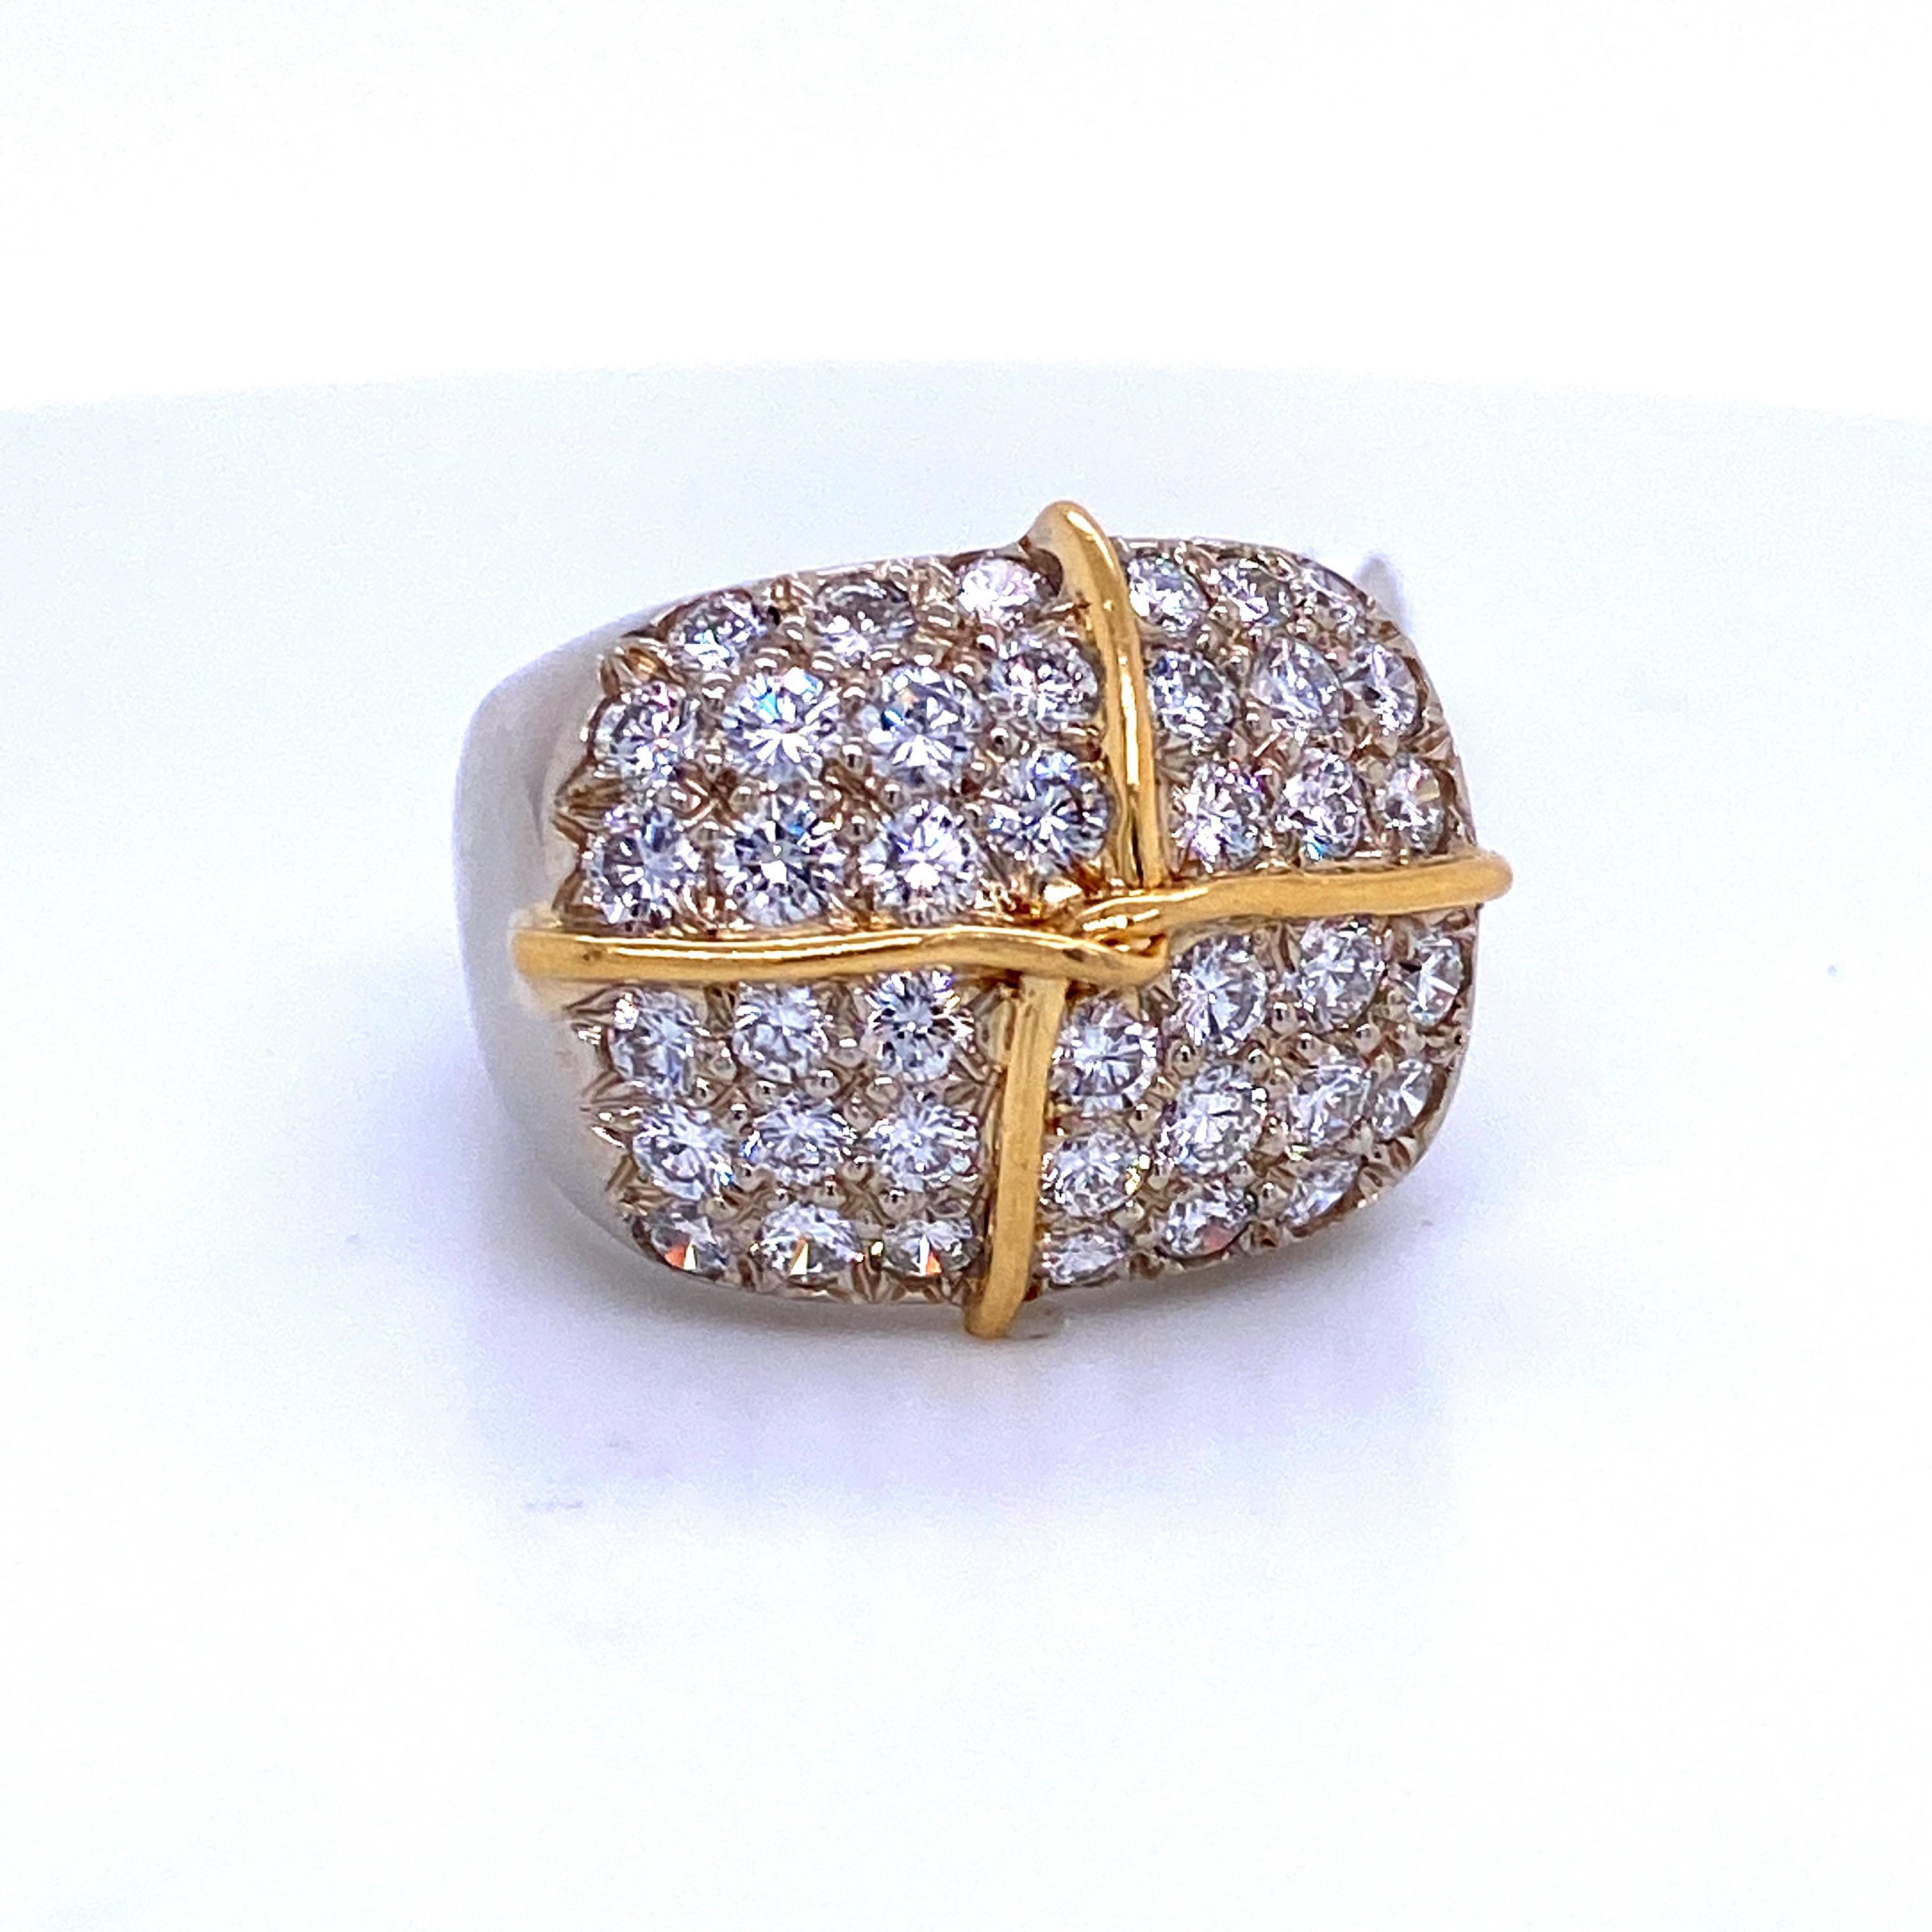 18K White gold ring featuring 40 round brilliants weighing 2.64 carats with a decorative 18k yellow gold ribbon motif trim. 
Average Stone: 0.07 PTS
Color G
Clarity SI

Size 6
Sizeable free of charge